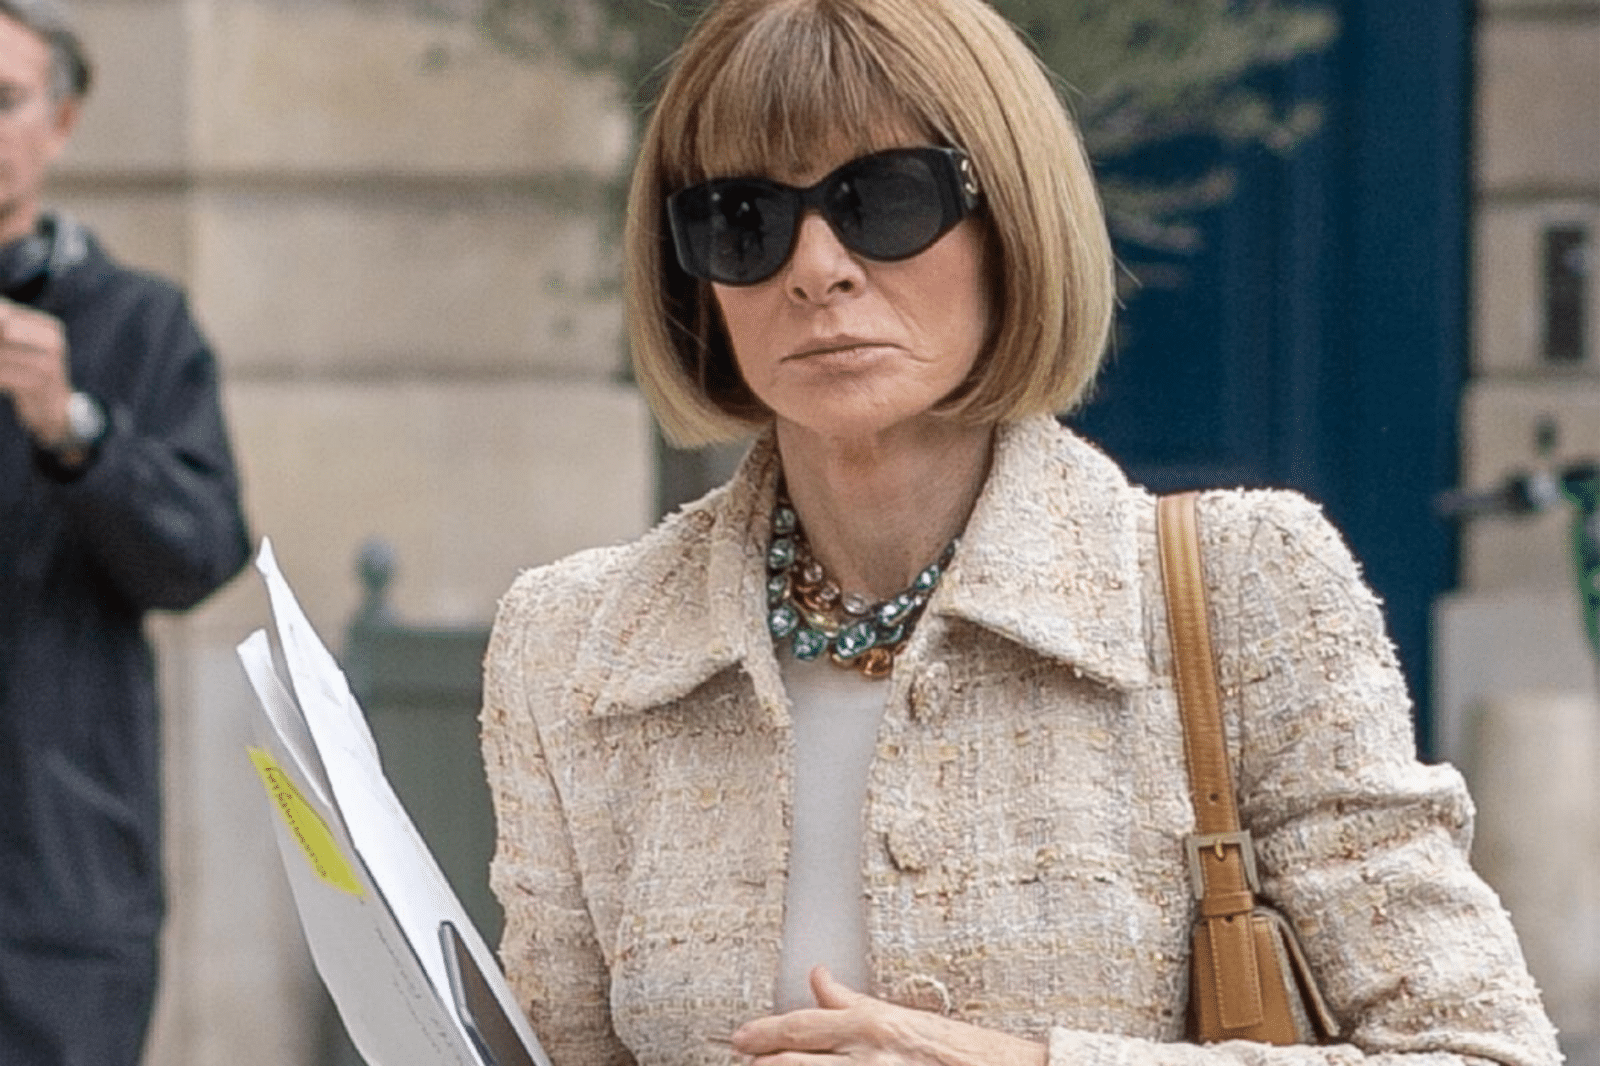 With Anna Wintour in turmoil, will the editor in chief leave Vogue ...